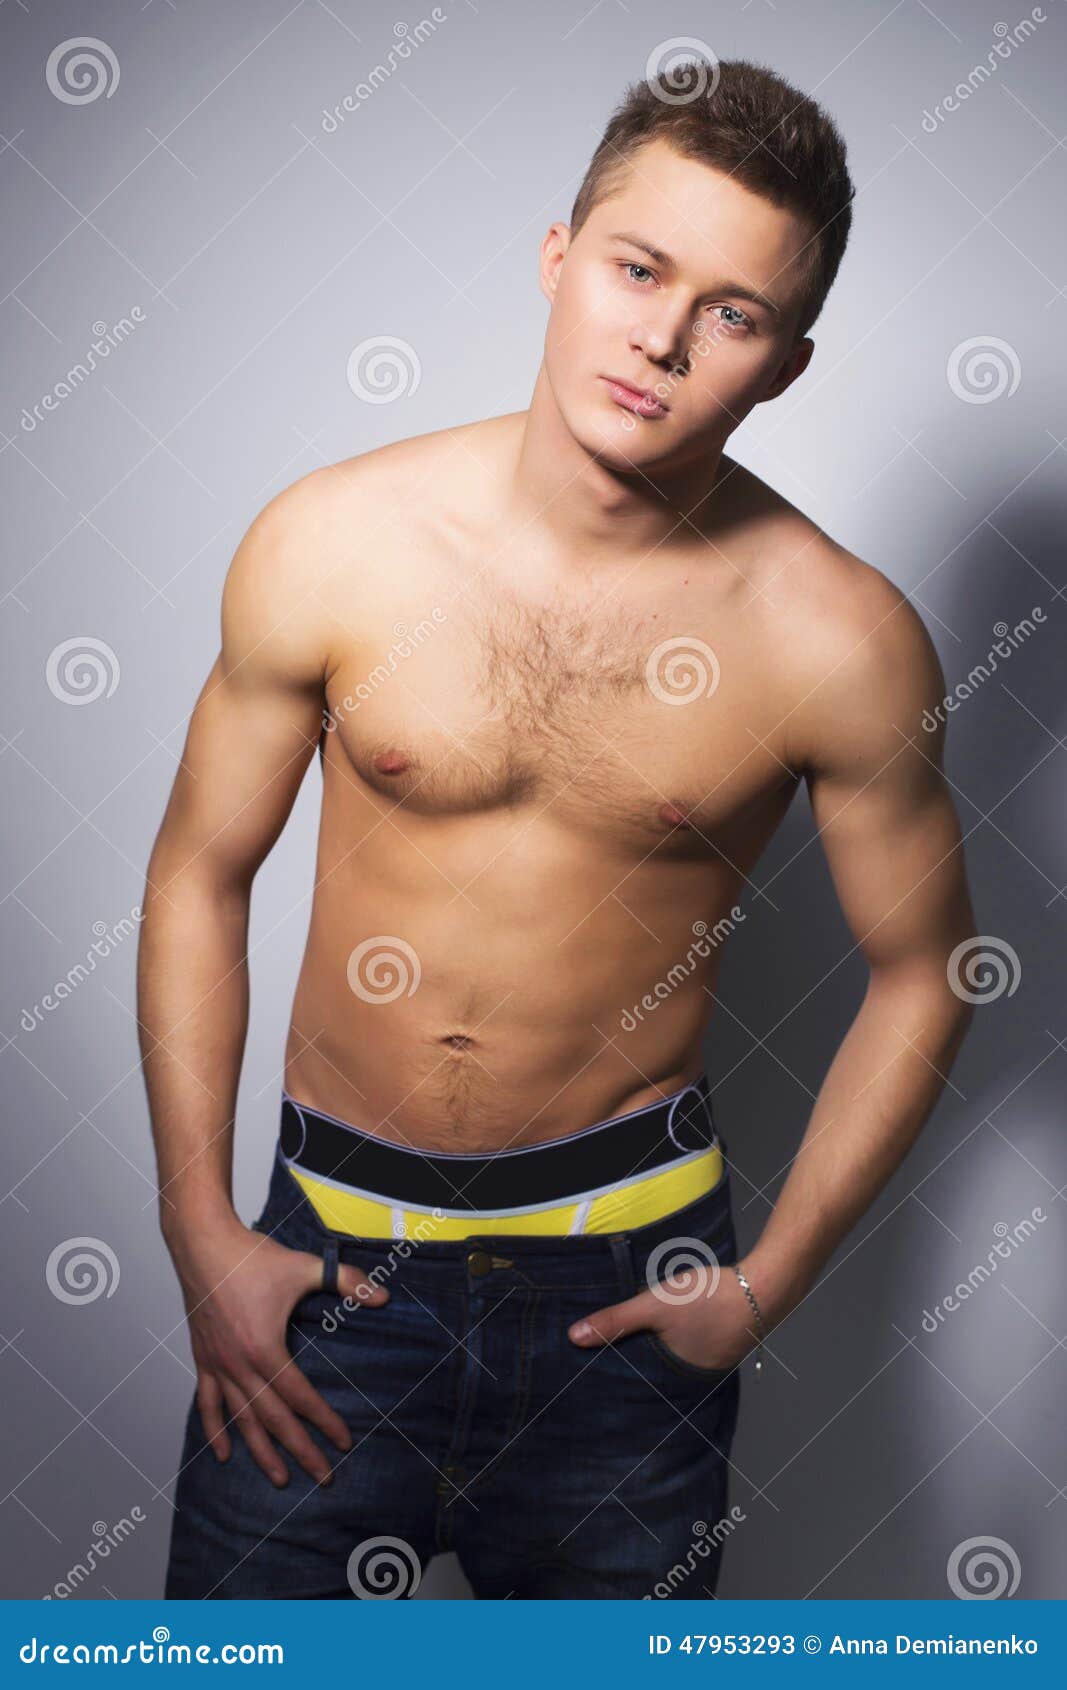 Shirtless Handsome Man With Fit Body Lean Against A Wall Stock Image -  Image of muscular, chest: 47953293